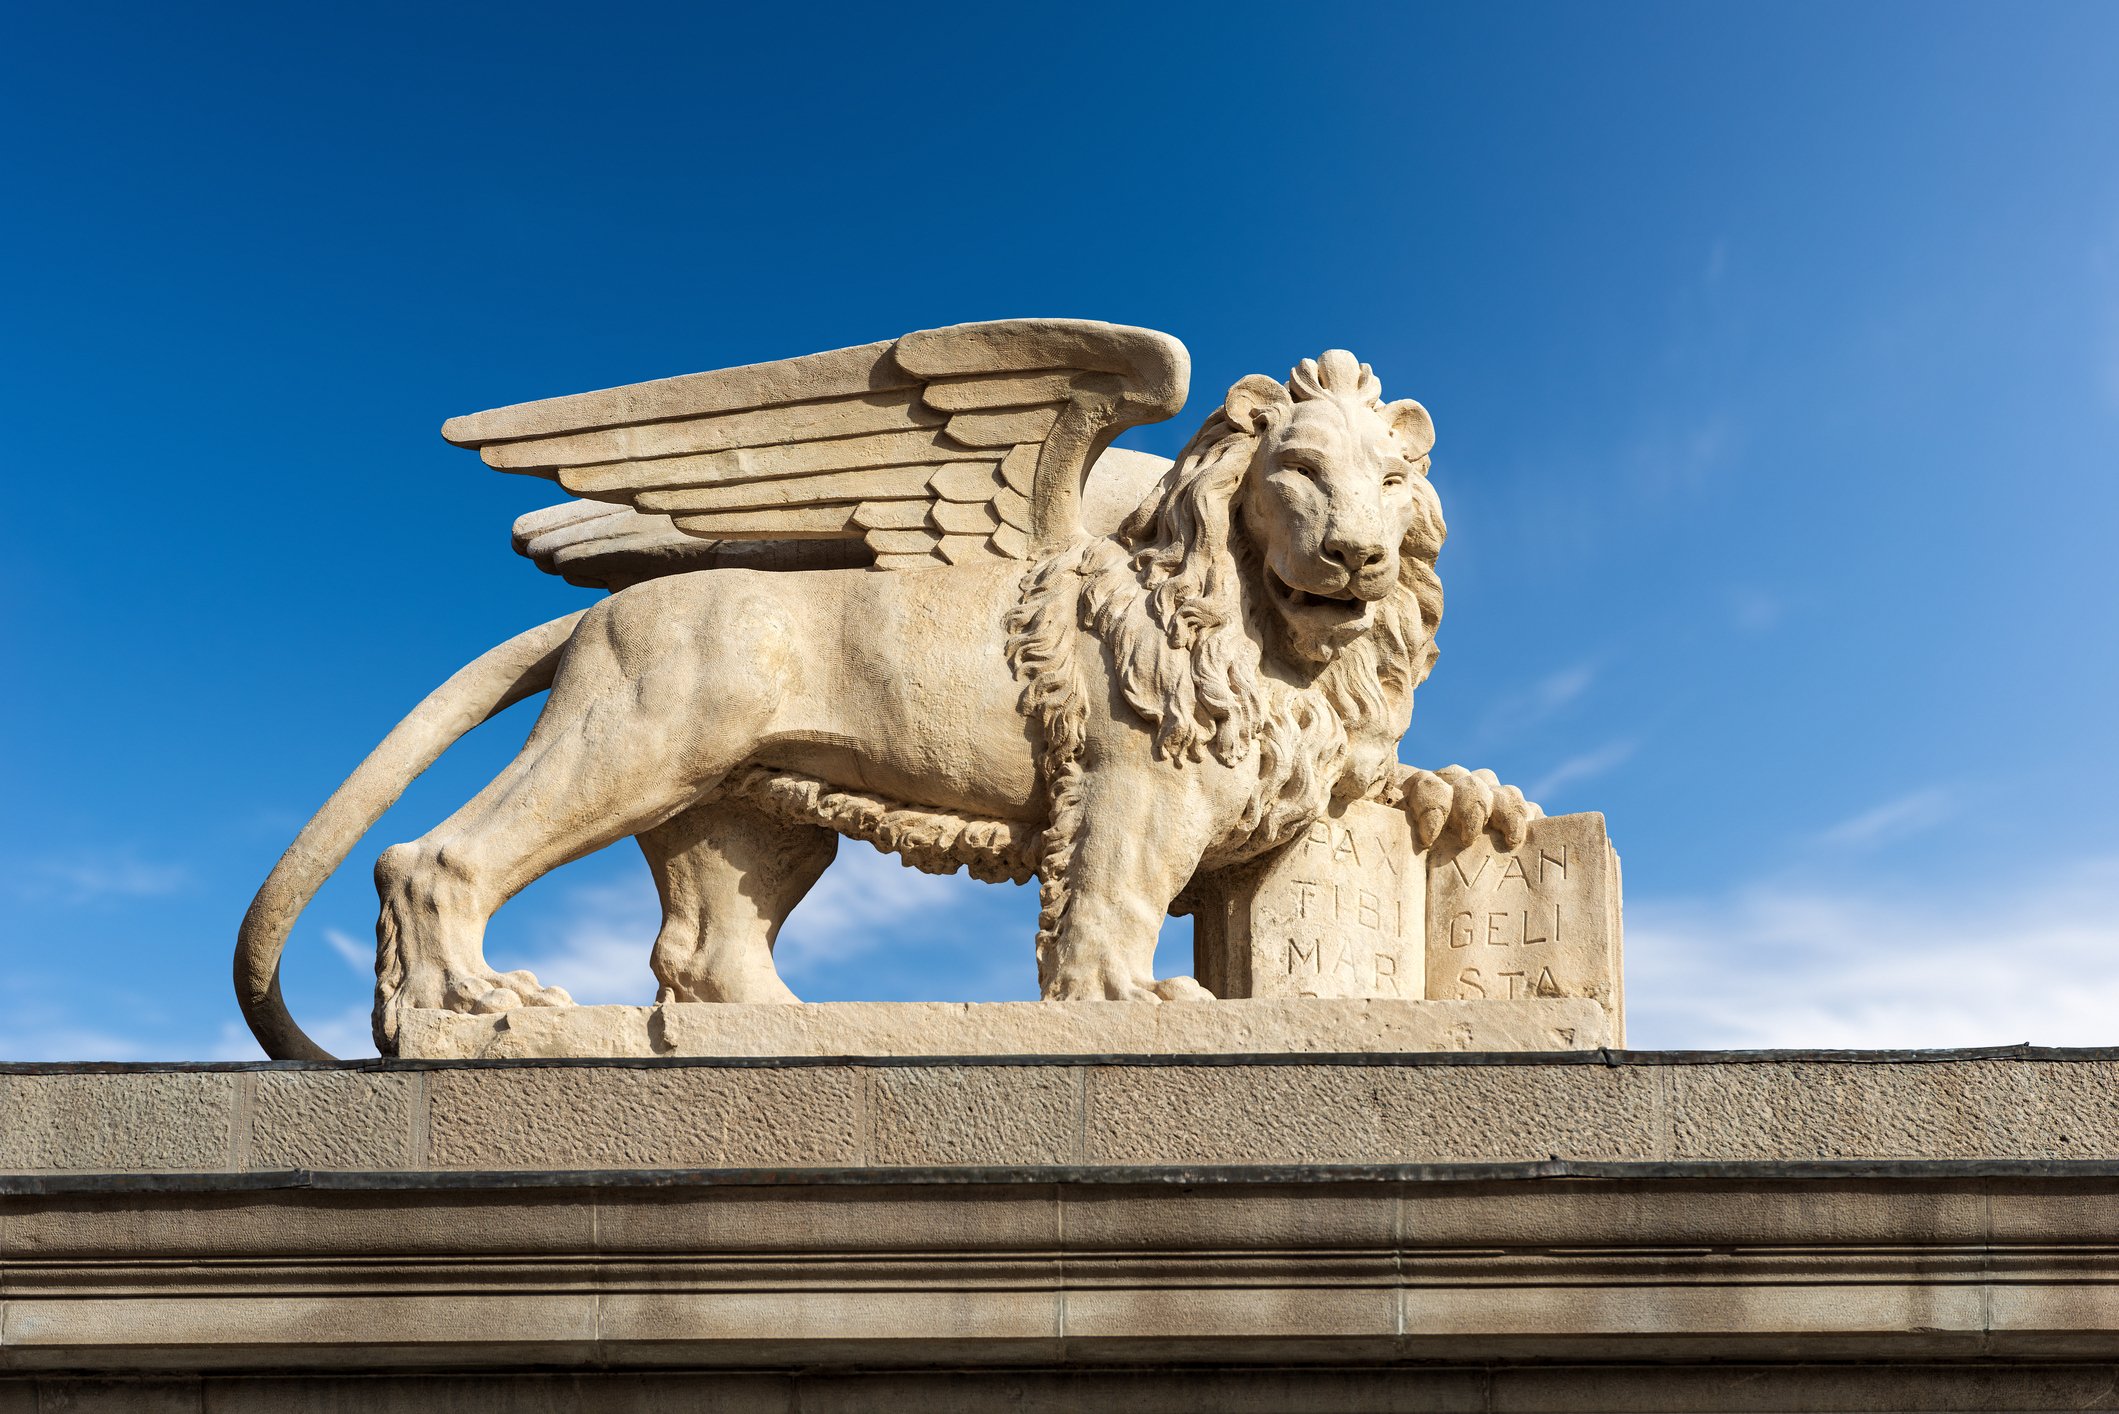 dreamstime_m_304239453 Winged Lion of St Mark by A Masnovo.jpg